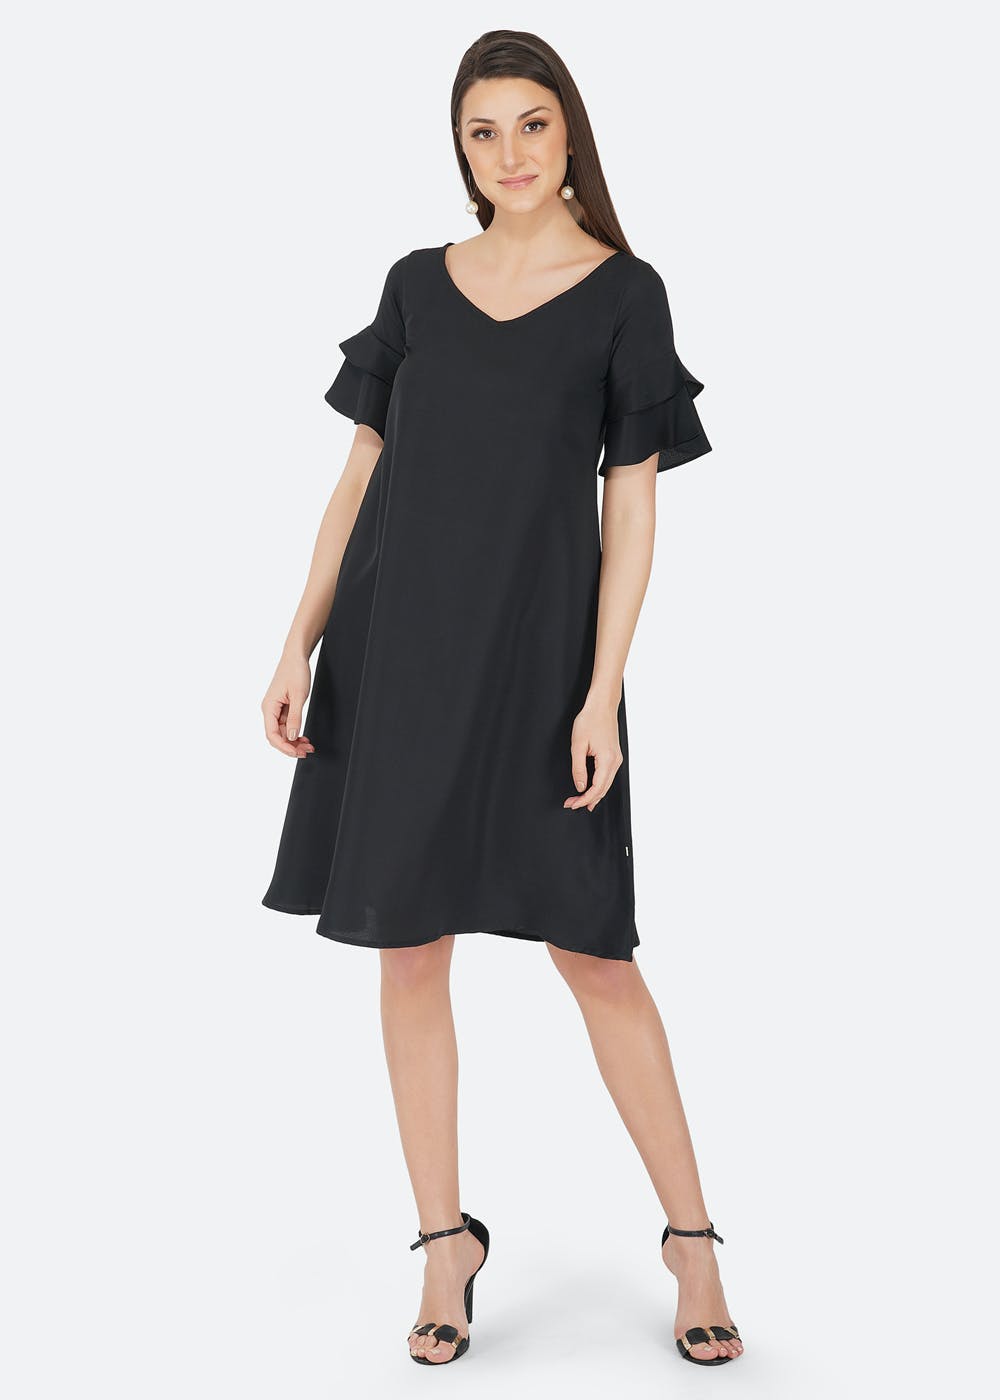 Get Black Crepe A-line Dress with Flounce Sleeves at ₹ 999 | LBB Shop